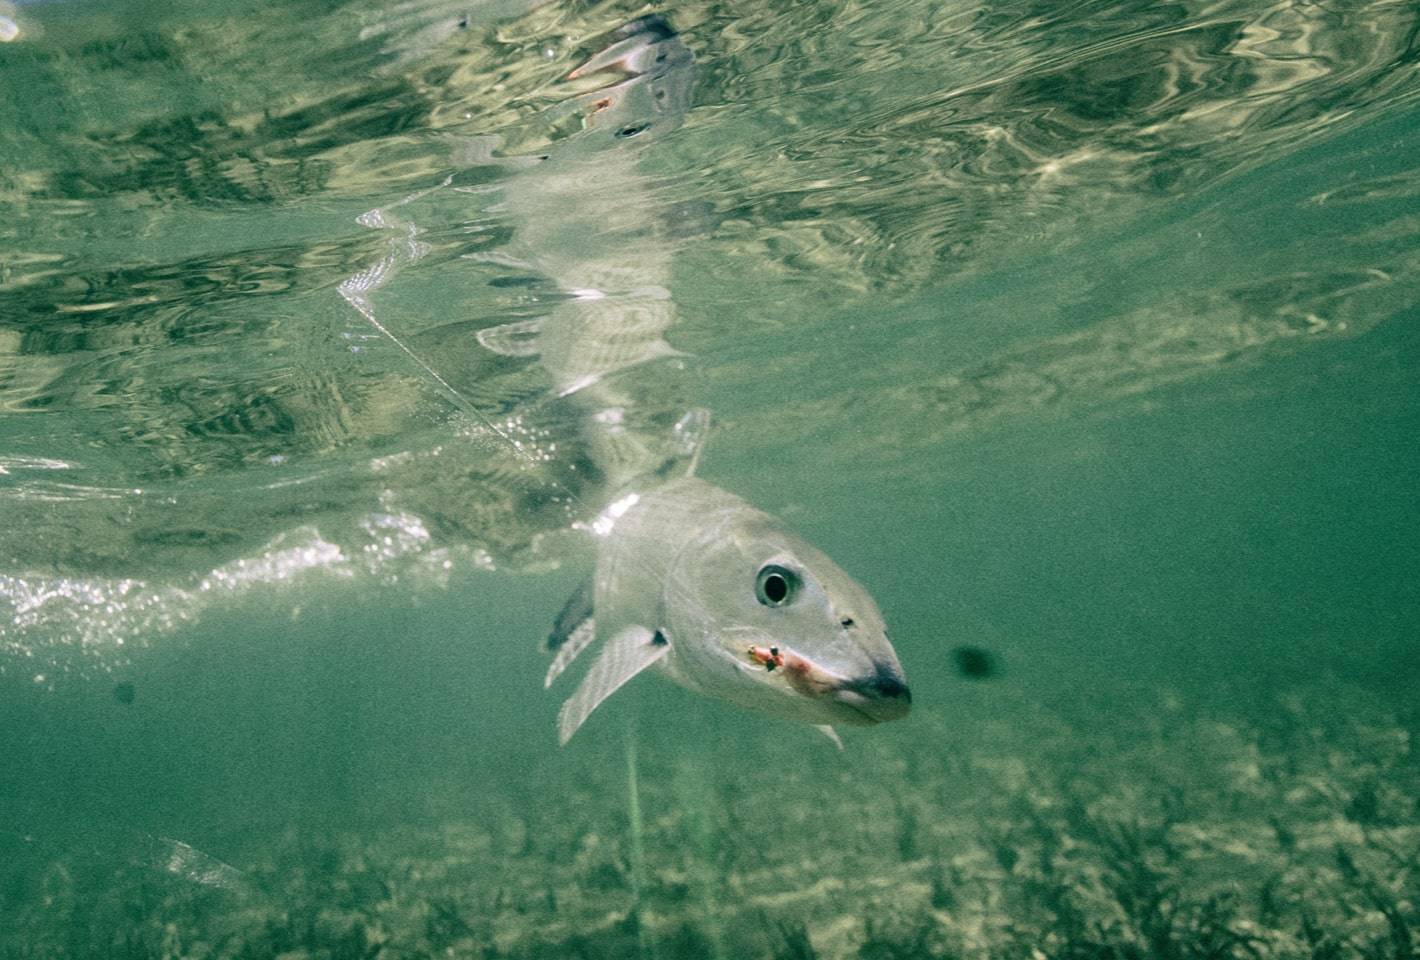 Bonefish hooked on the fly